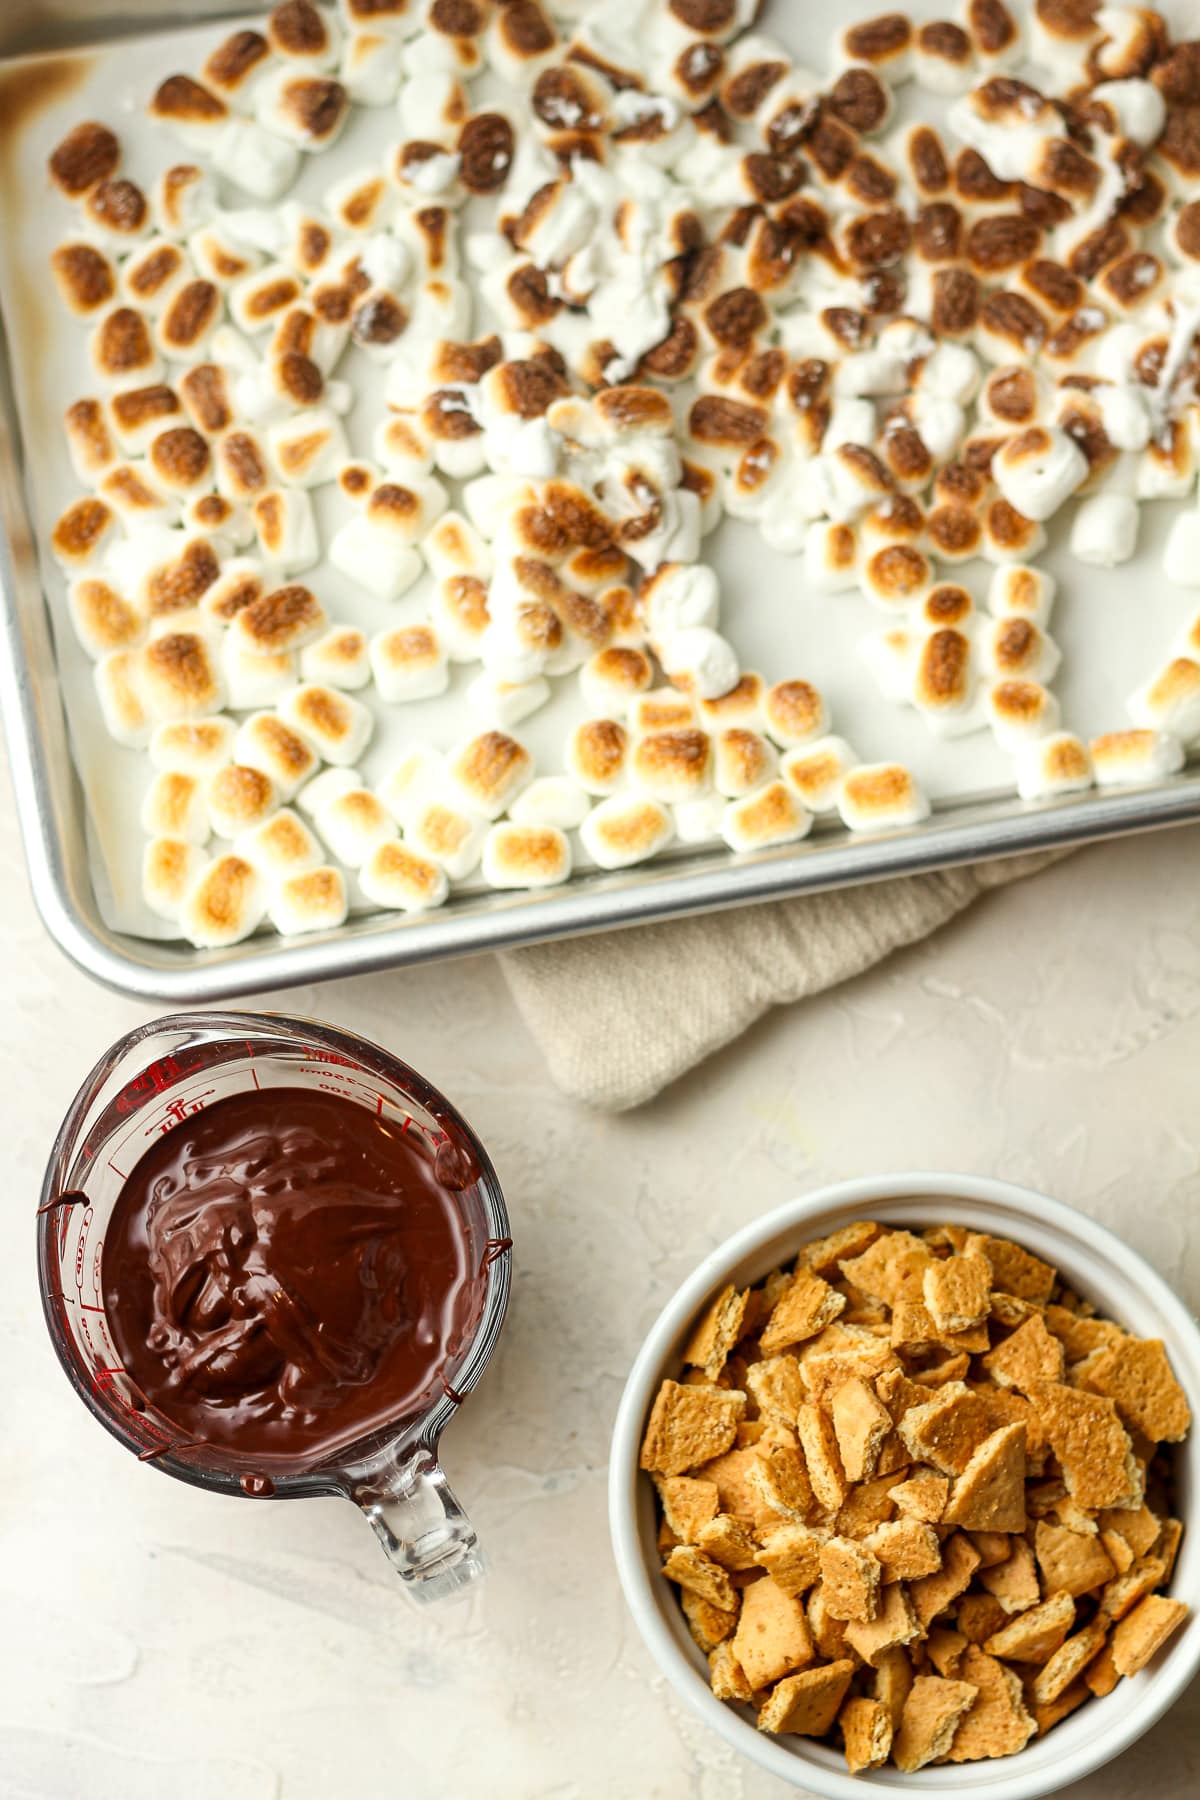 The s'mores mix-ins - toasted marshmallows, melted chocolate, and graham cracker pieces.